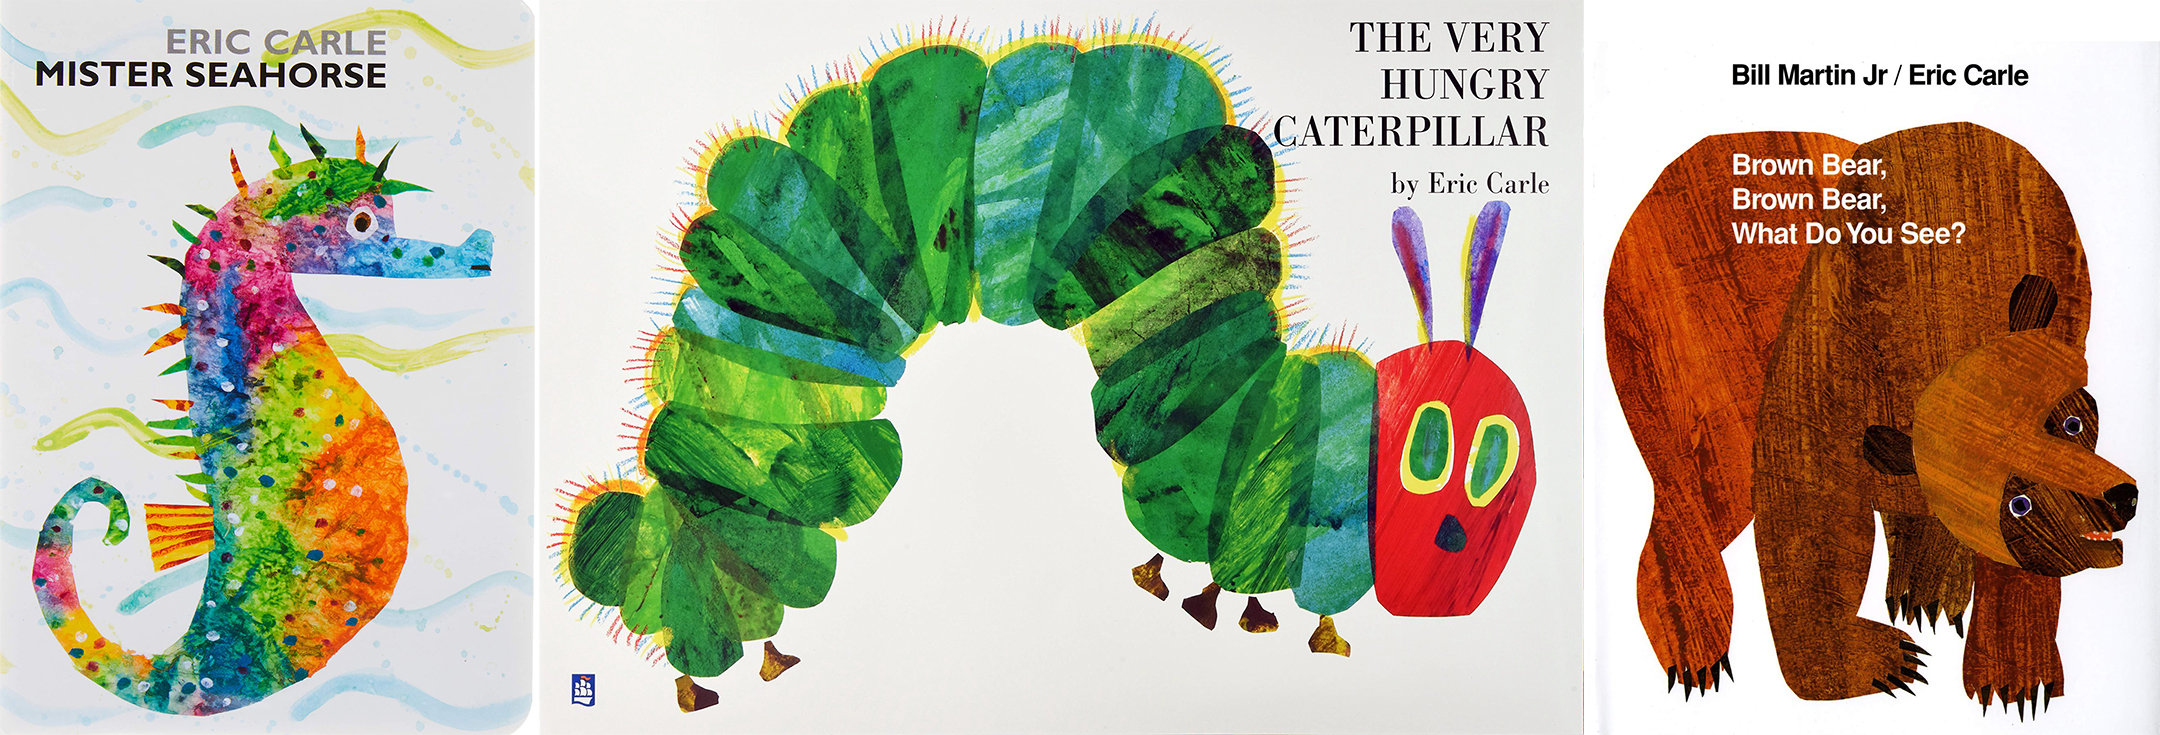 Covers of the books, from left, Mr. Seahorse, The Very Hungry Caterpillar, and Brown Bear Brown Bear What Do You See